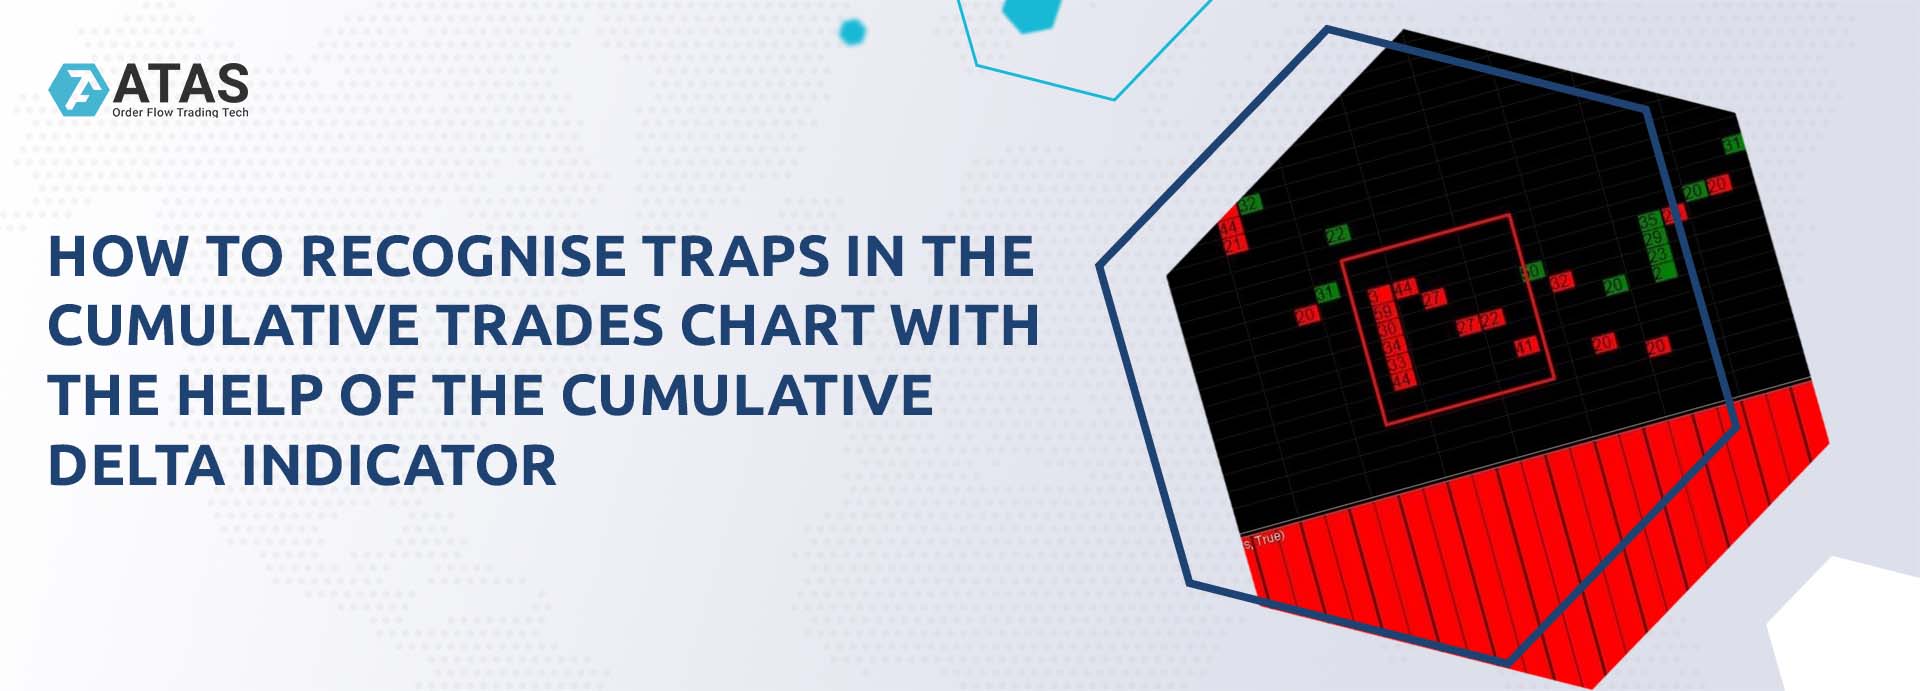 How to recognise traps in the Cumulative Trades chart with the help of the Cumulative Delta indicator